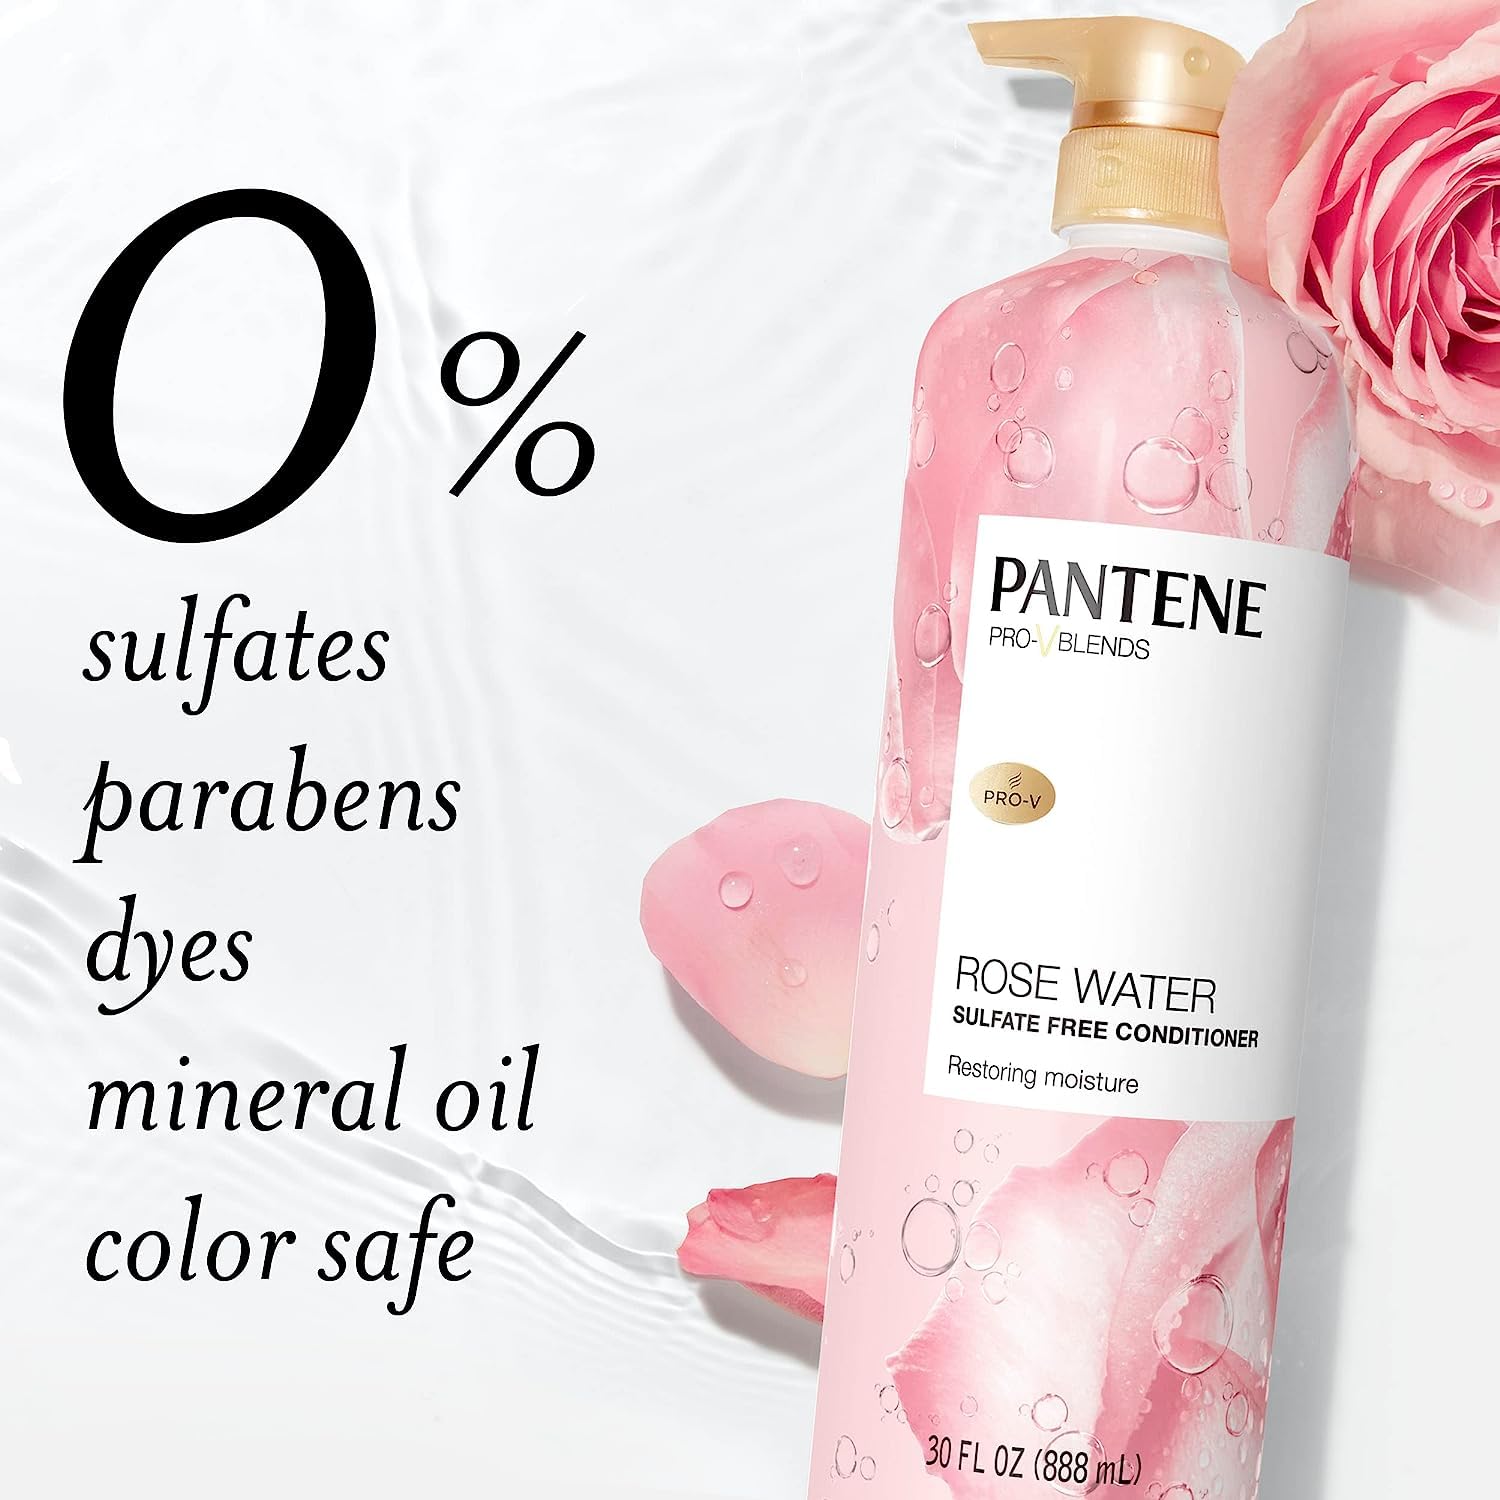 Pantene Rose Water Conditioner, Soothes, Replenishes Hydration, Safe for Color Treated Hair, Nutrient Infused with Vitamin B5 and Antioxidants, Pro-V Blends, 30.0 oz